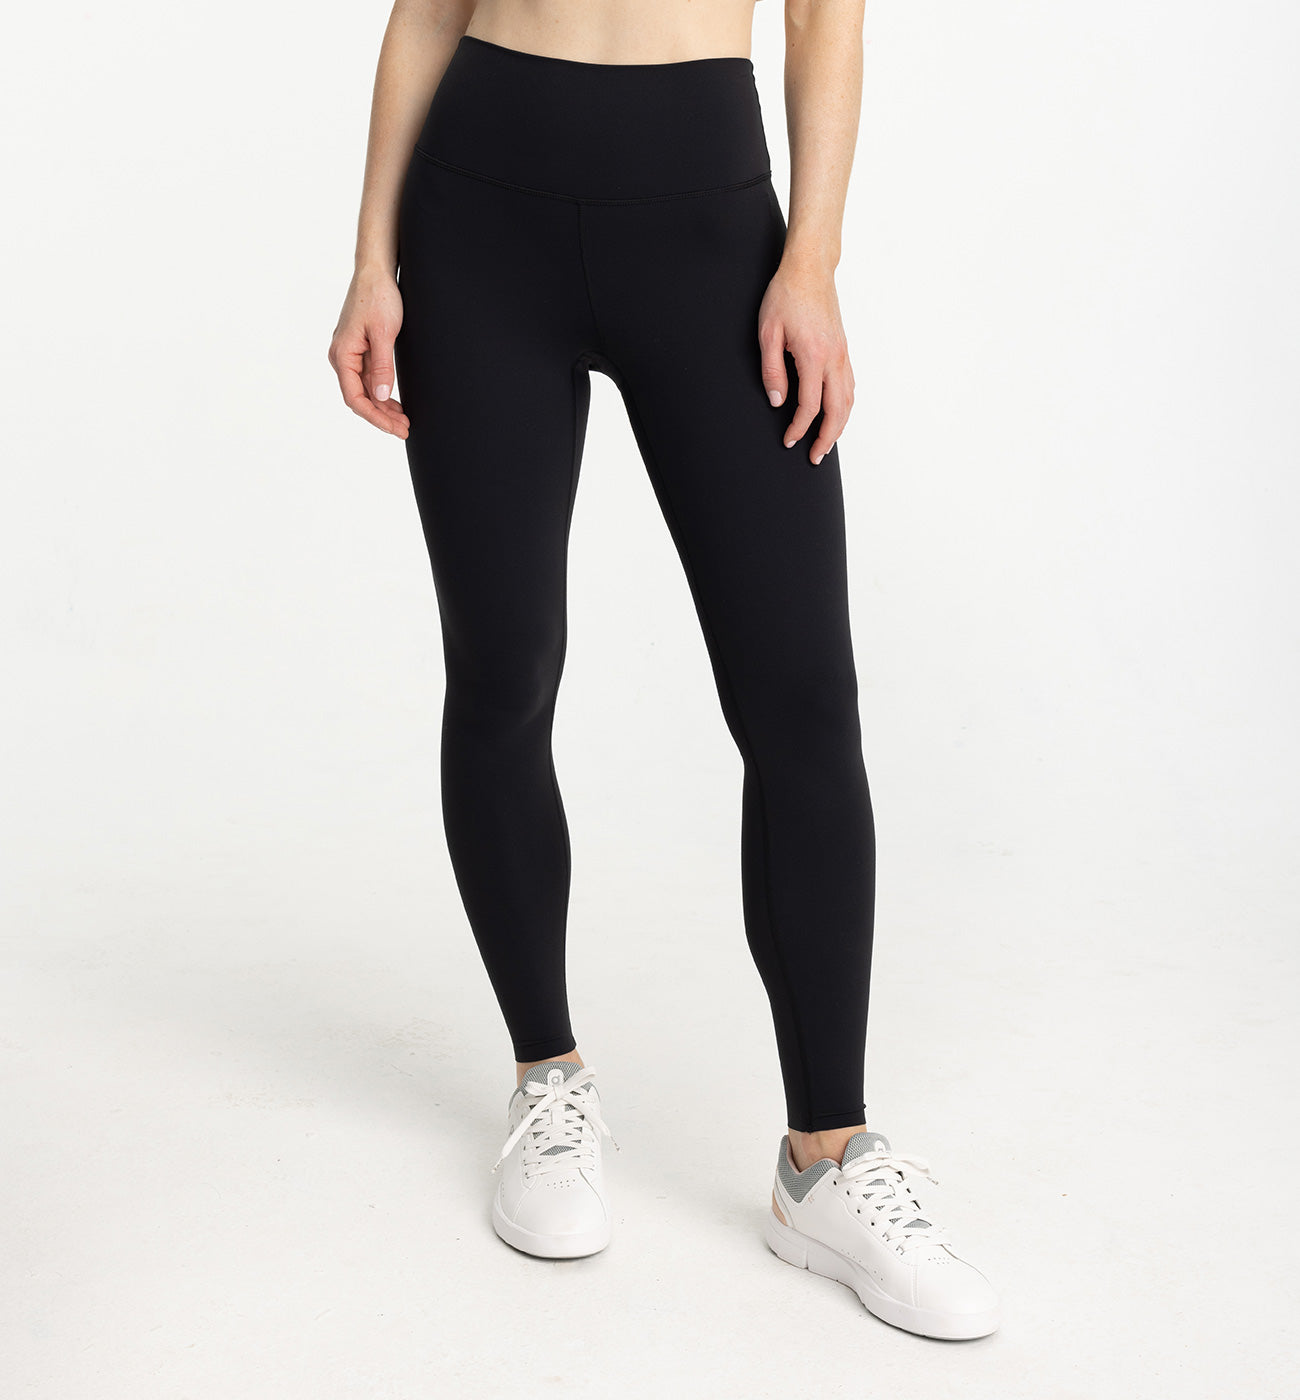 Free People Plank All Day Leggings Black XS-S (US Women's 0-6) at